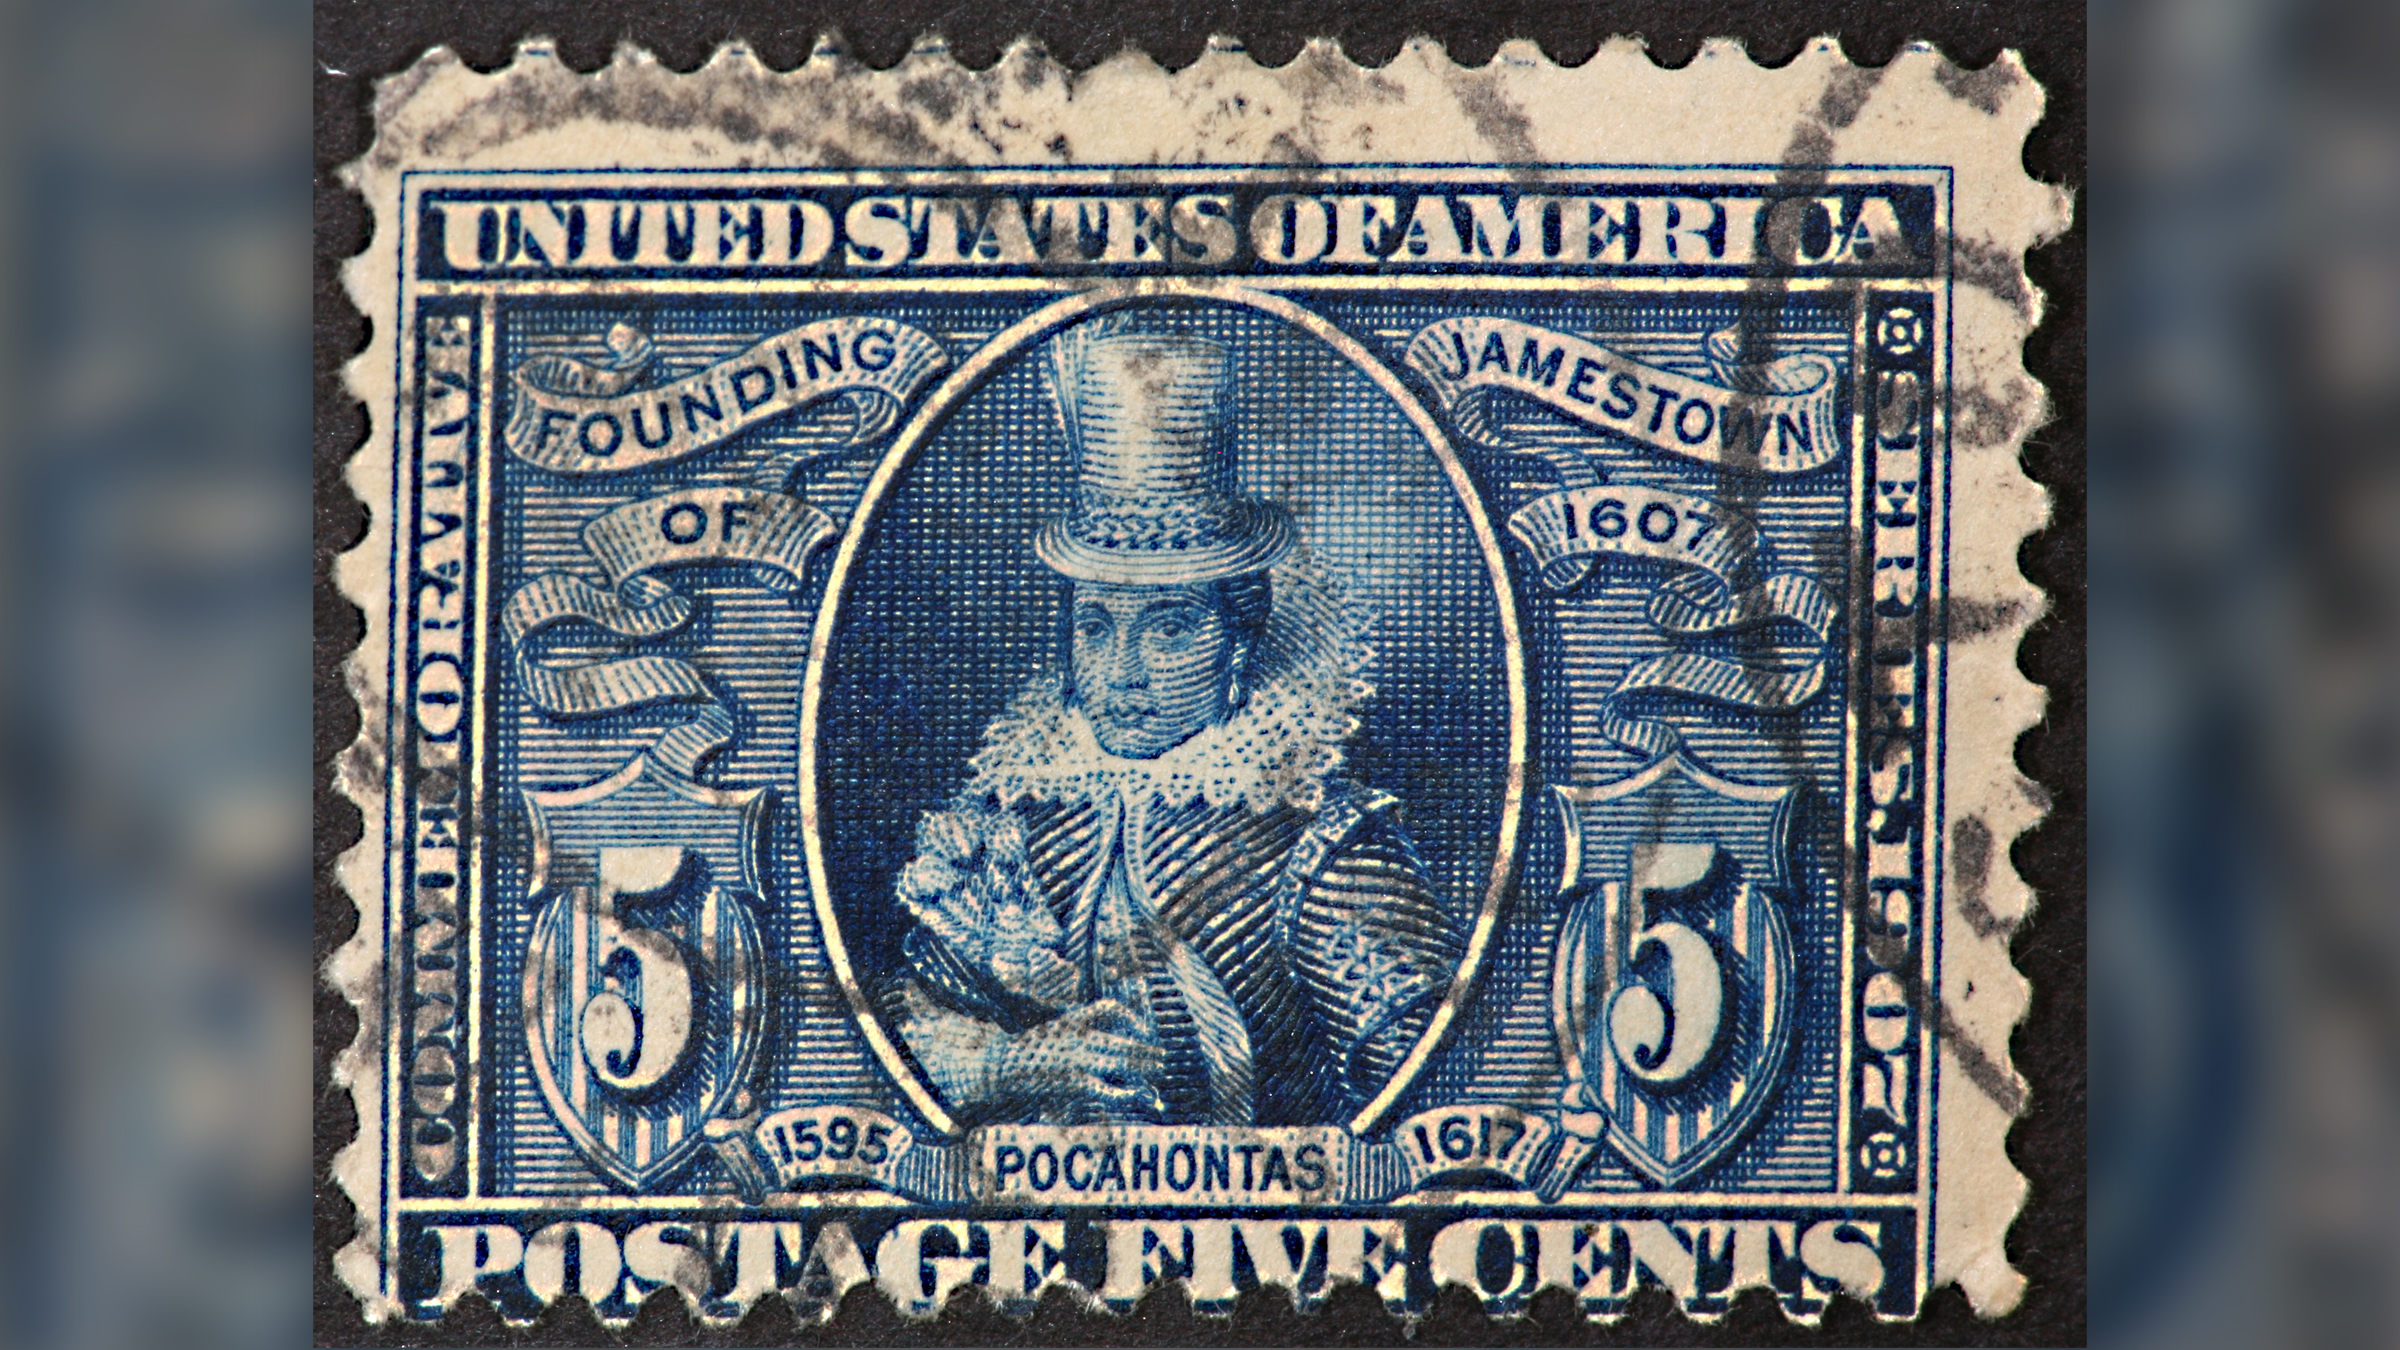 A 1907 U.S. postage stamp featuring Pocahontas. The stamp is colored blue and white.